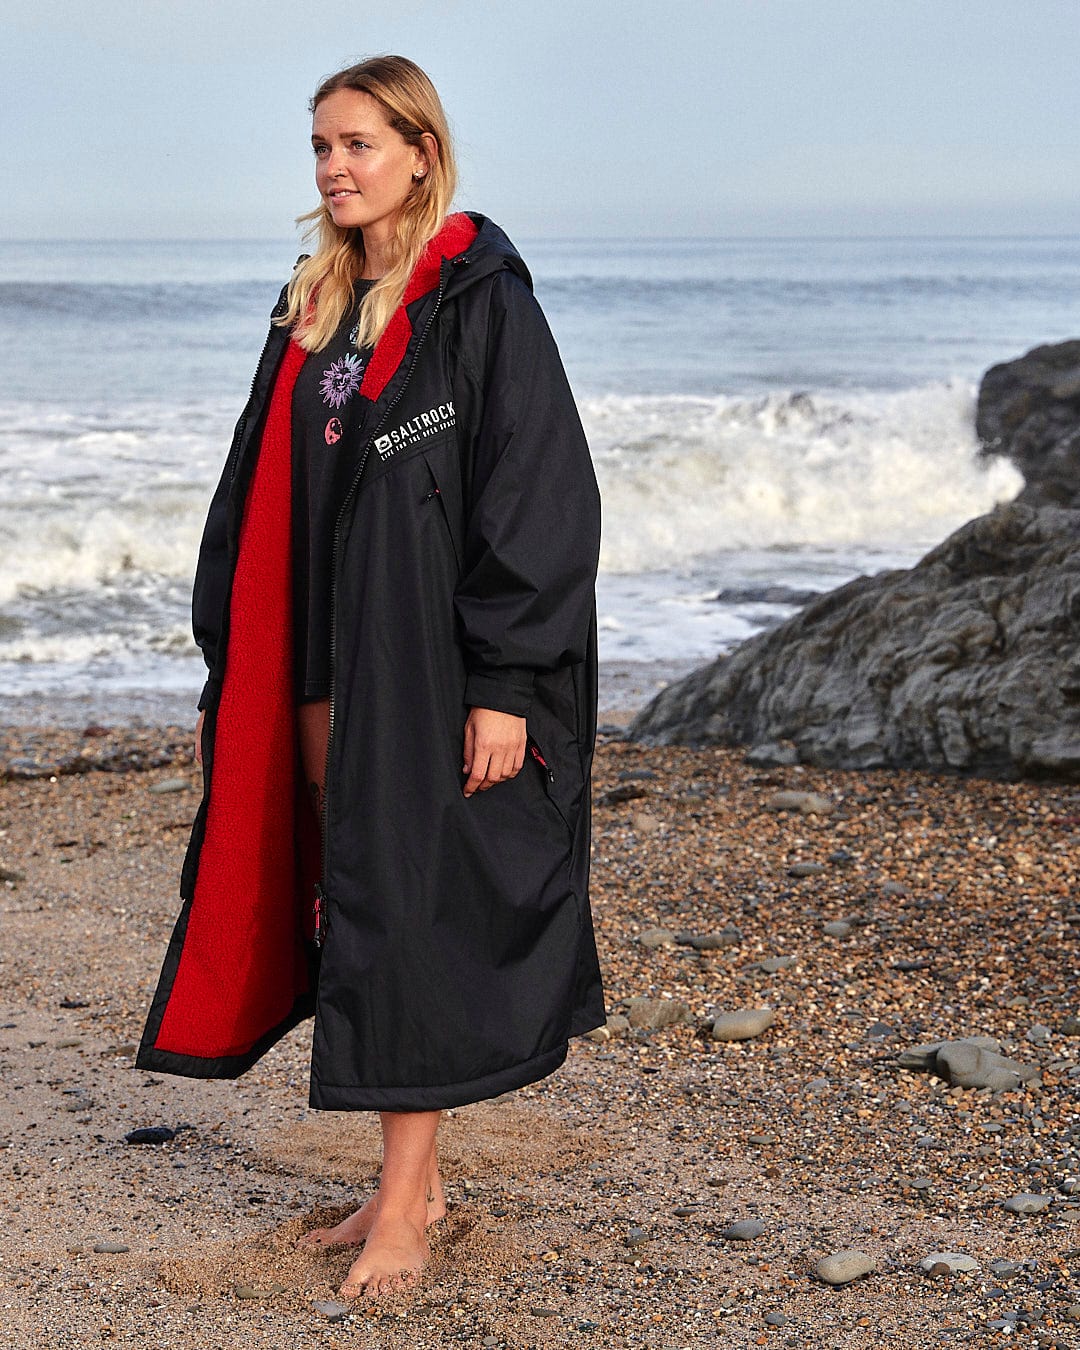 Woman in a Saltrock Recycled Four Seasons Changing Robe - Black/Red standing on a beach with waves and rocks in the background.